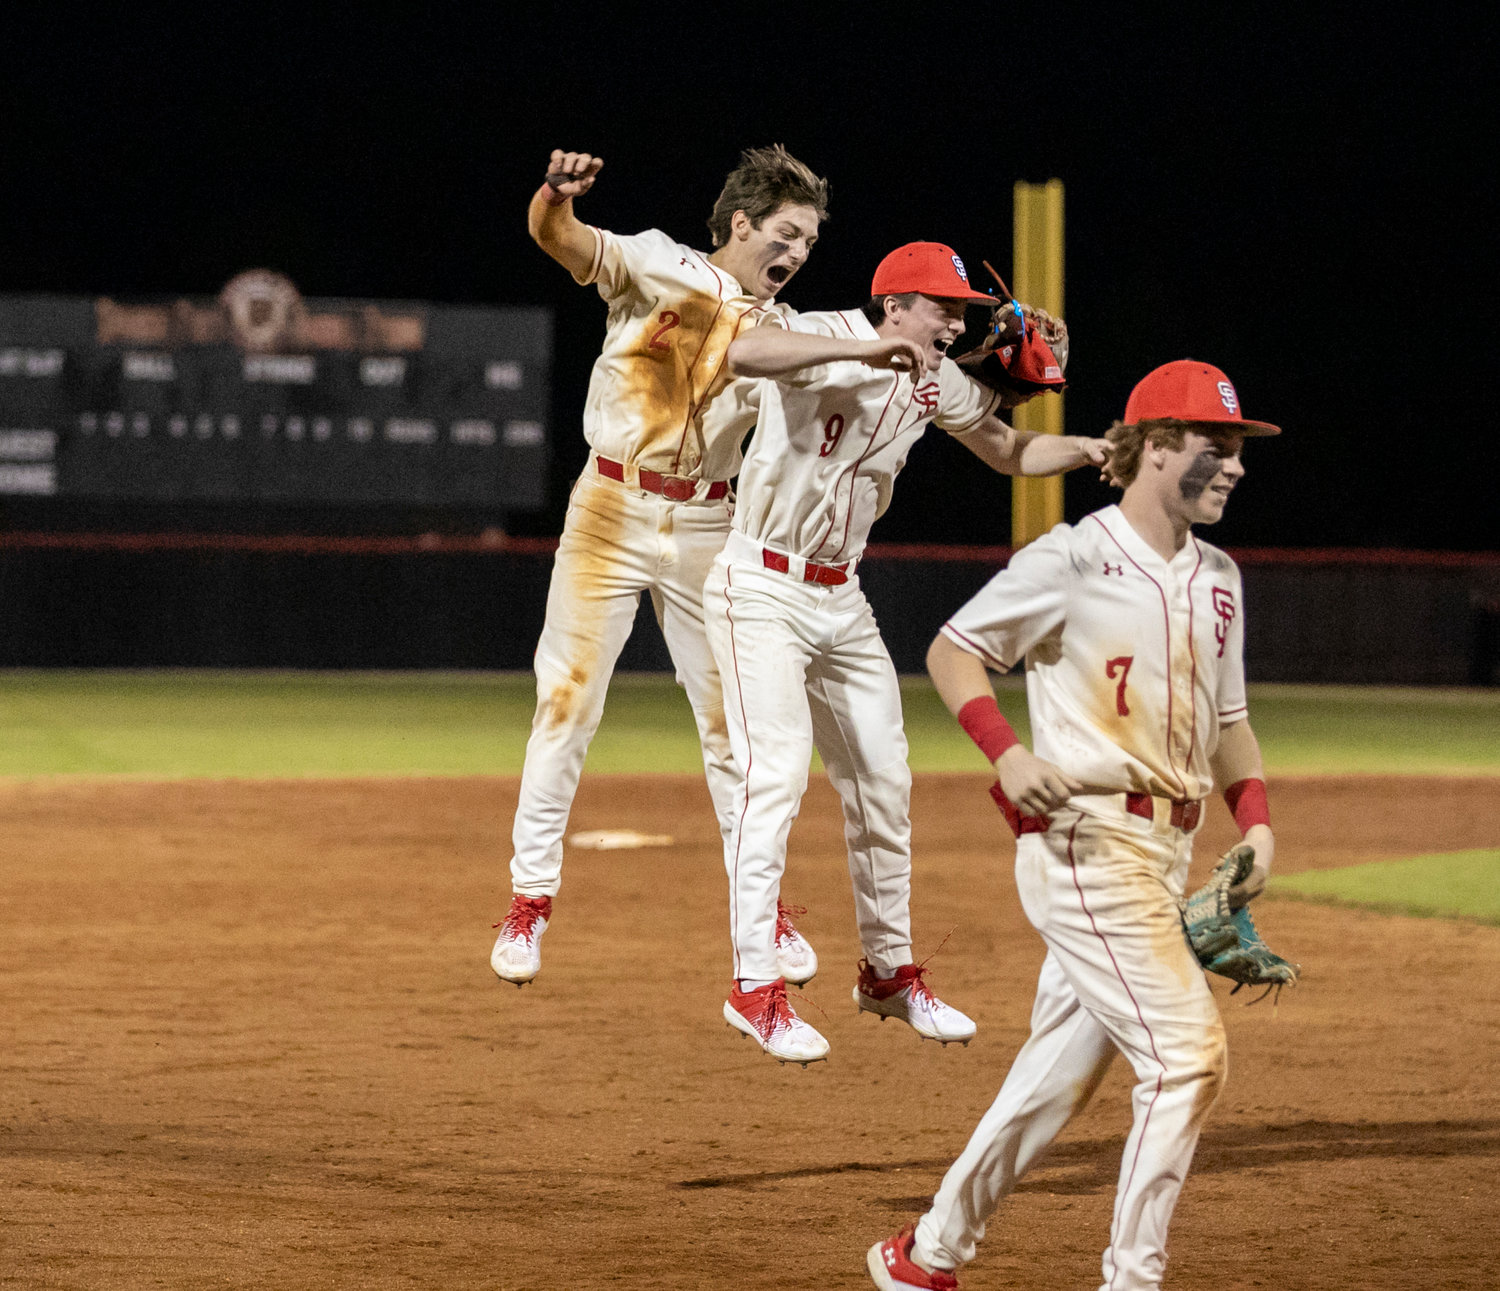 Pierce Dutton (2) and Chris Sullivan (9) leap in celebration of their Opening Day win Thursday, Feb. 16, at Spanish Fort High School. The Toros took home a 7-4 win over St. Paul’s where Dutton delivered the final out on a leaping catch at the wall with the bases loaded.